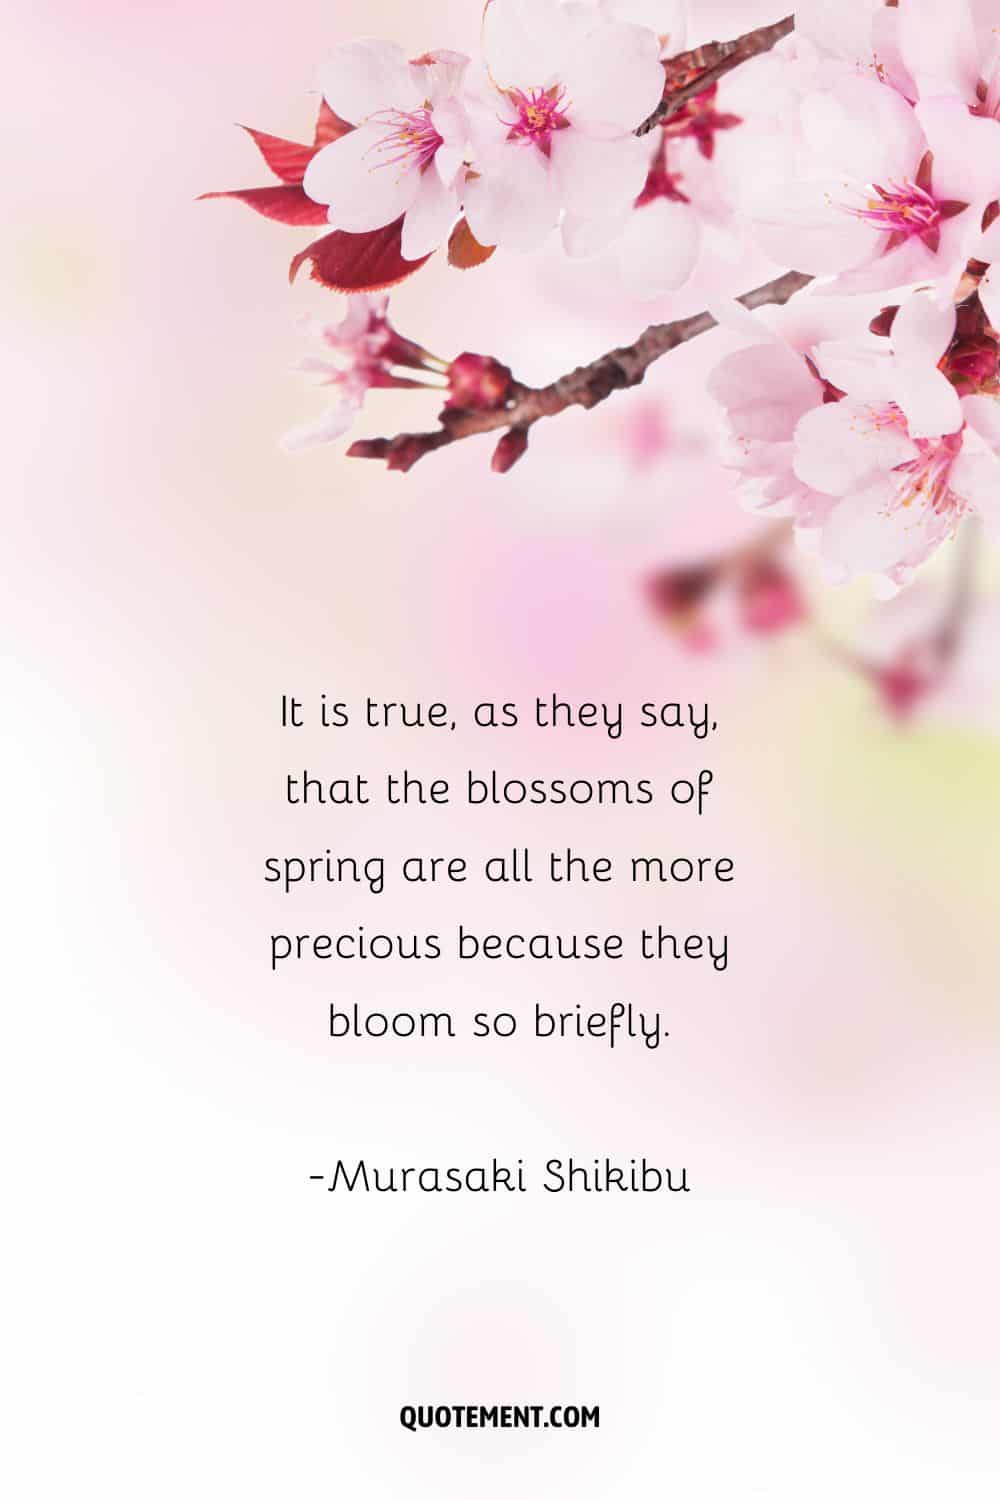 It is true, as they say, that the blossoms of spring are all the more precious because they bloom so briefly